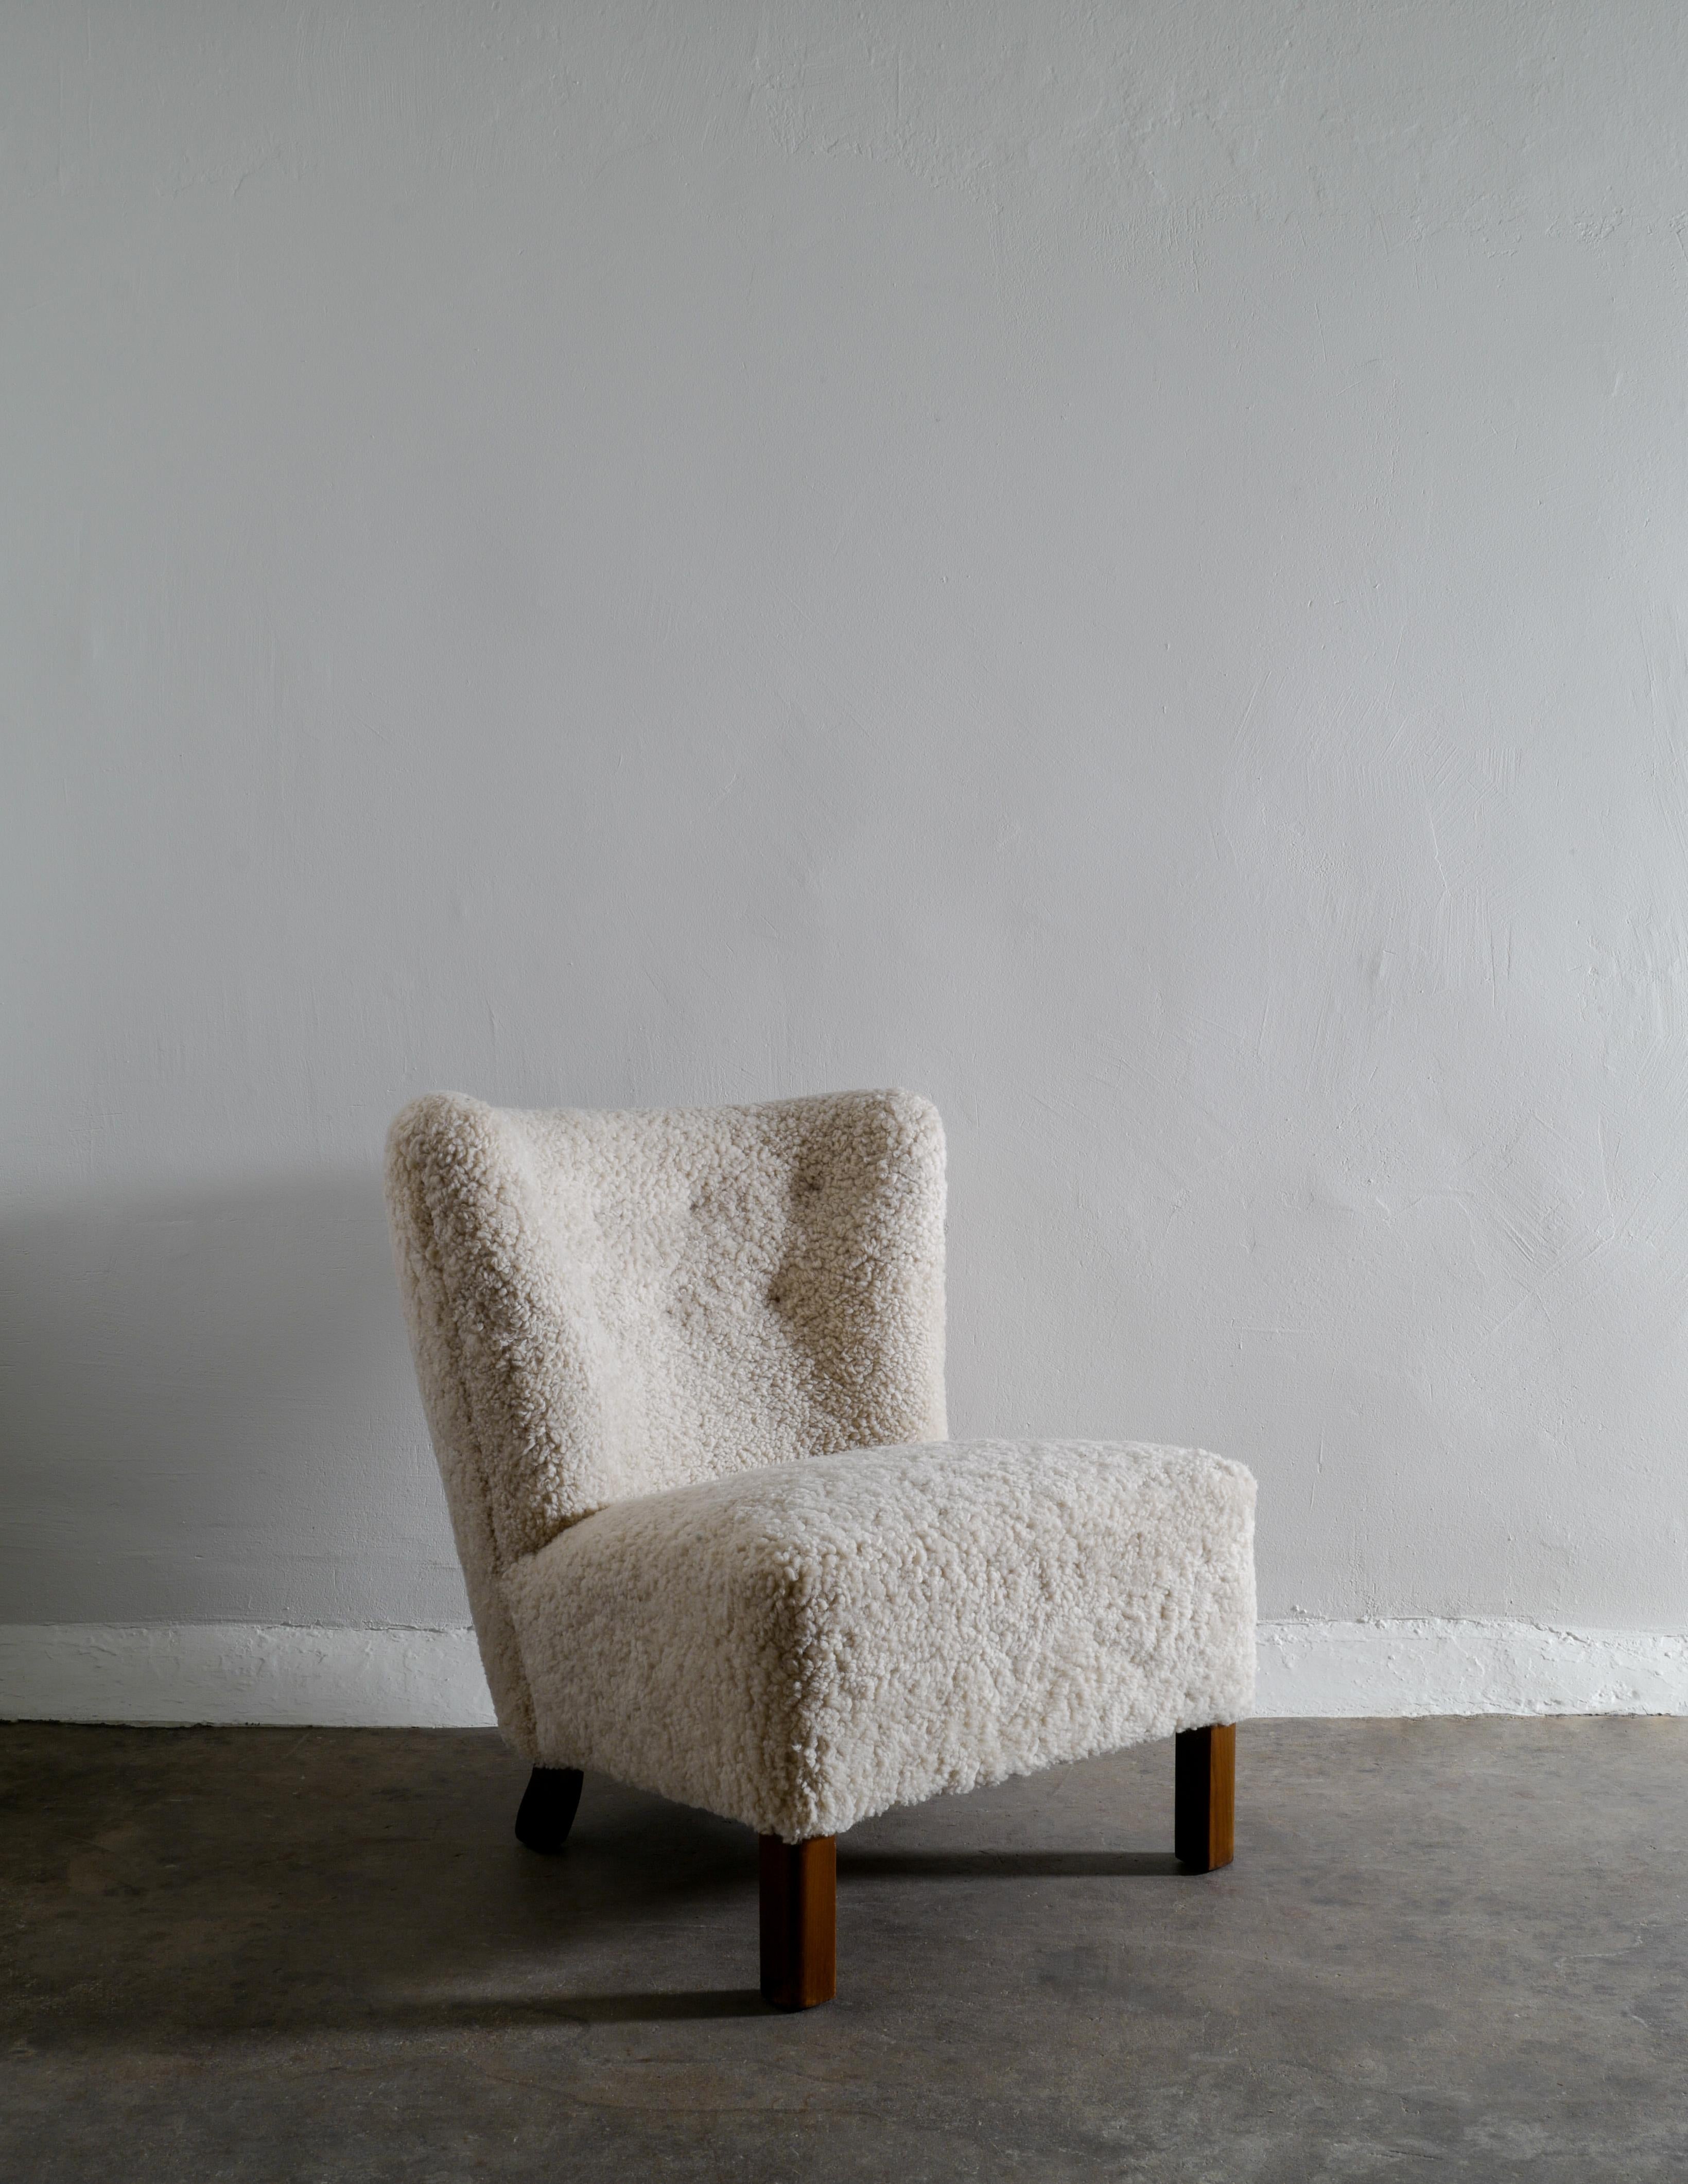 Rare armless easy chair produced in Denmark in the 1940s by unknown designer. Fully restored and upholstered in sheepskin. Dark stained oak feet. Attributed to Gösta Jonsson. 

Dimensions: H: 78 cm W: 62 cm D: 80 cm SH: 43 cm.